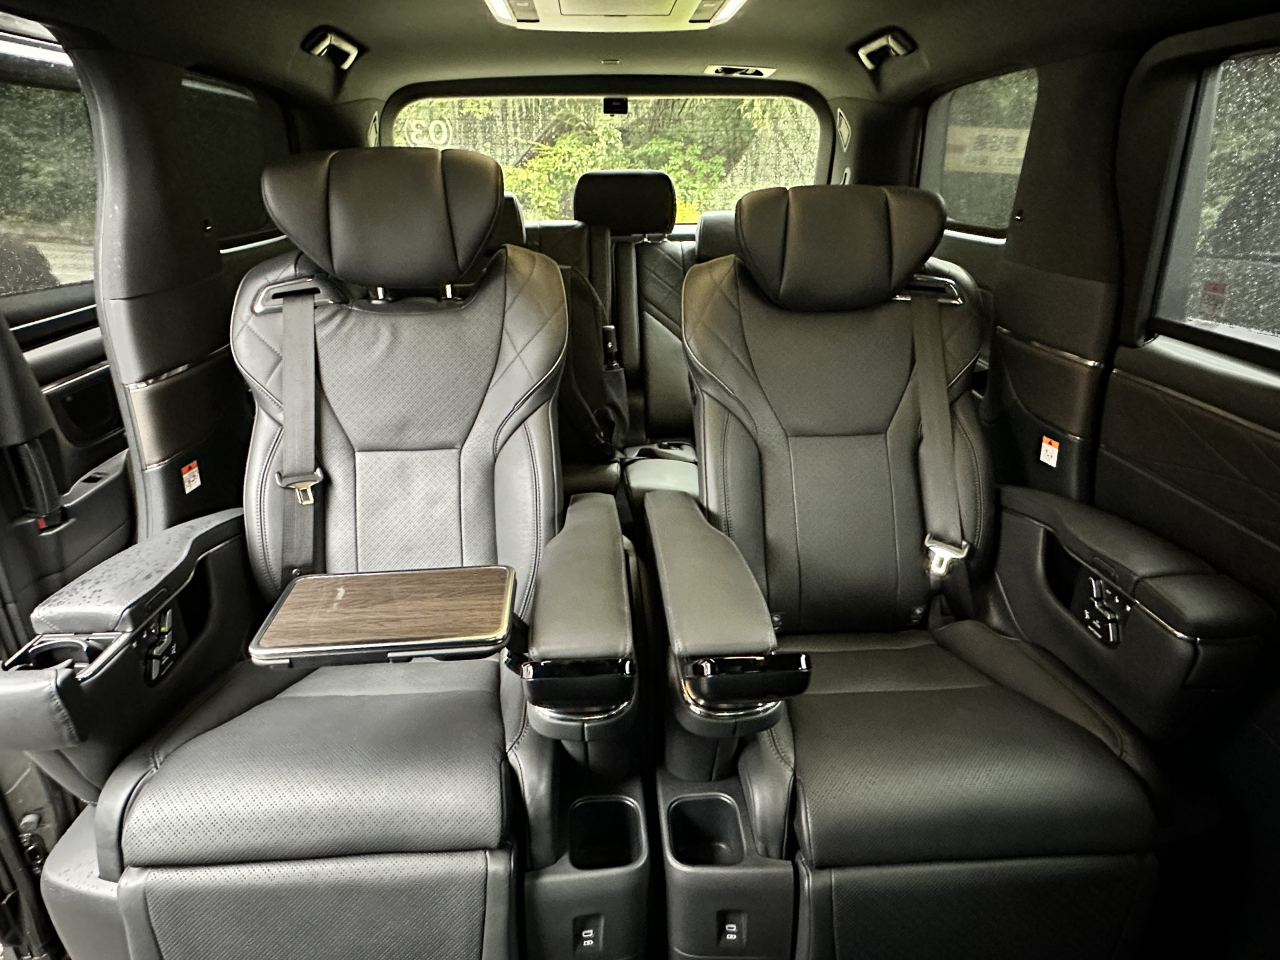 A view of the second and third-row seats in Toyota’s premium minivan Alphard 2.5-liter Hybrid (Byun Hye-jin/The Korea Herald)